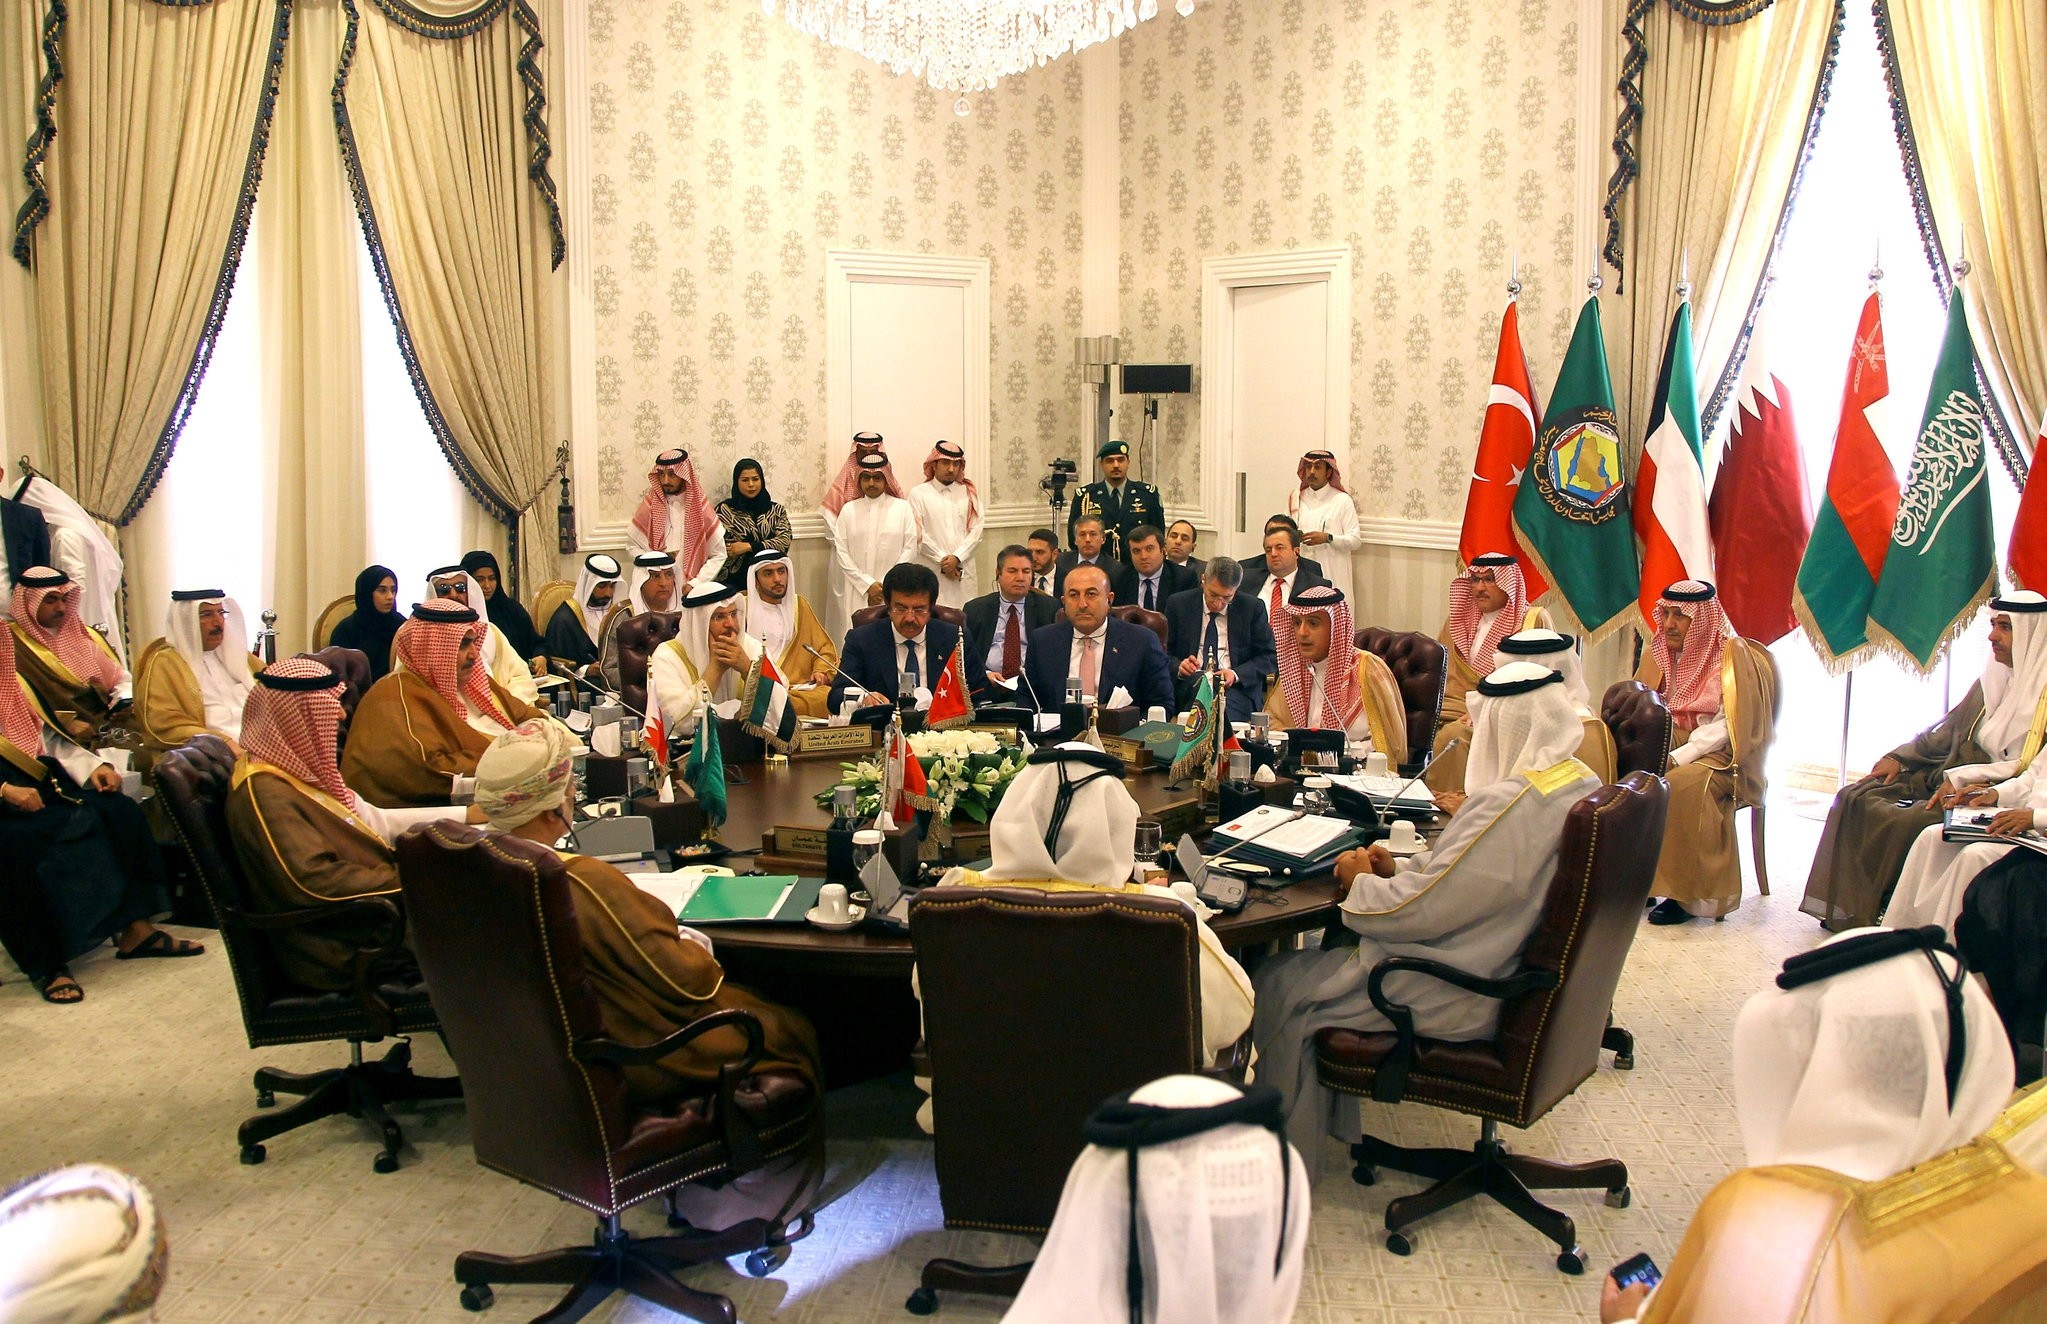 Mevlu00fct u00c7avuu015fou011flu attends a meeting with Foreign Ministers of Gulf Cooperation Council (GCC) in Riyadh, Saudi Arabia, October 13, 2016. (REUTERS Photo)